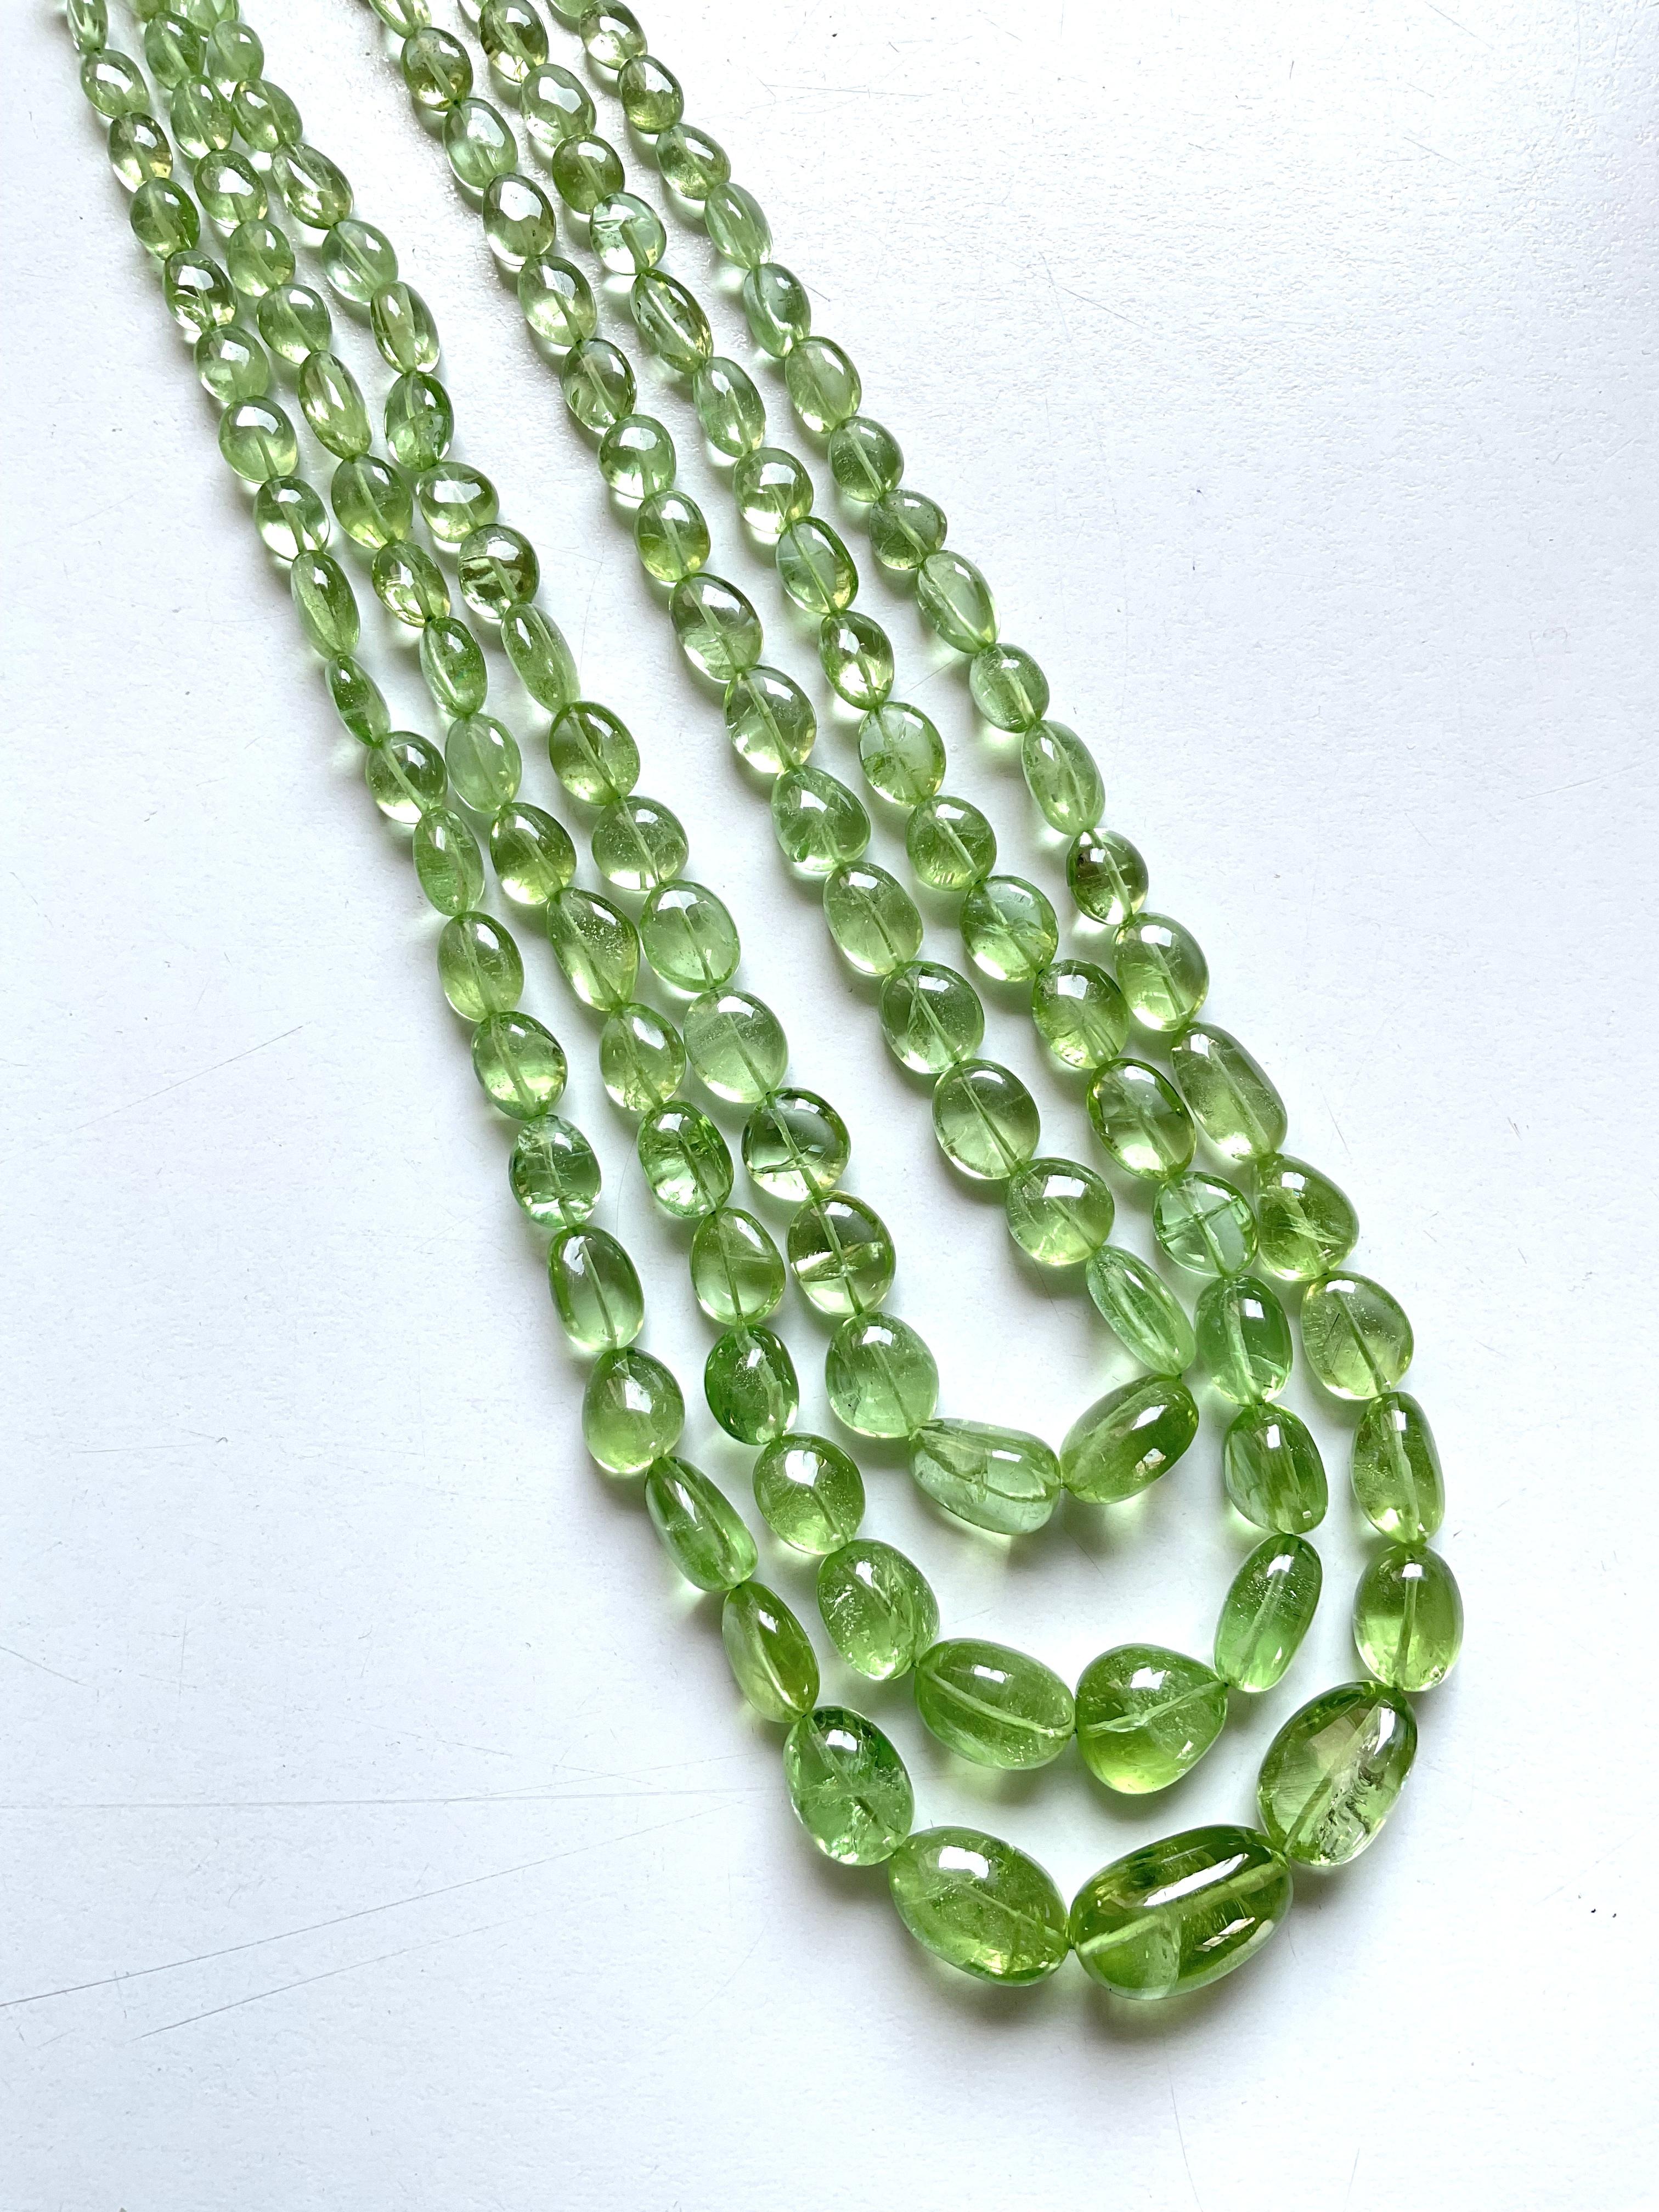 Tumbled 507.40 carats apple green peridot top quality plain tumbled natural necklace gem For Sale